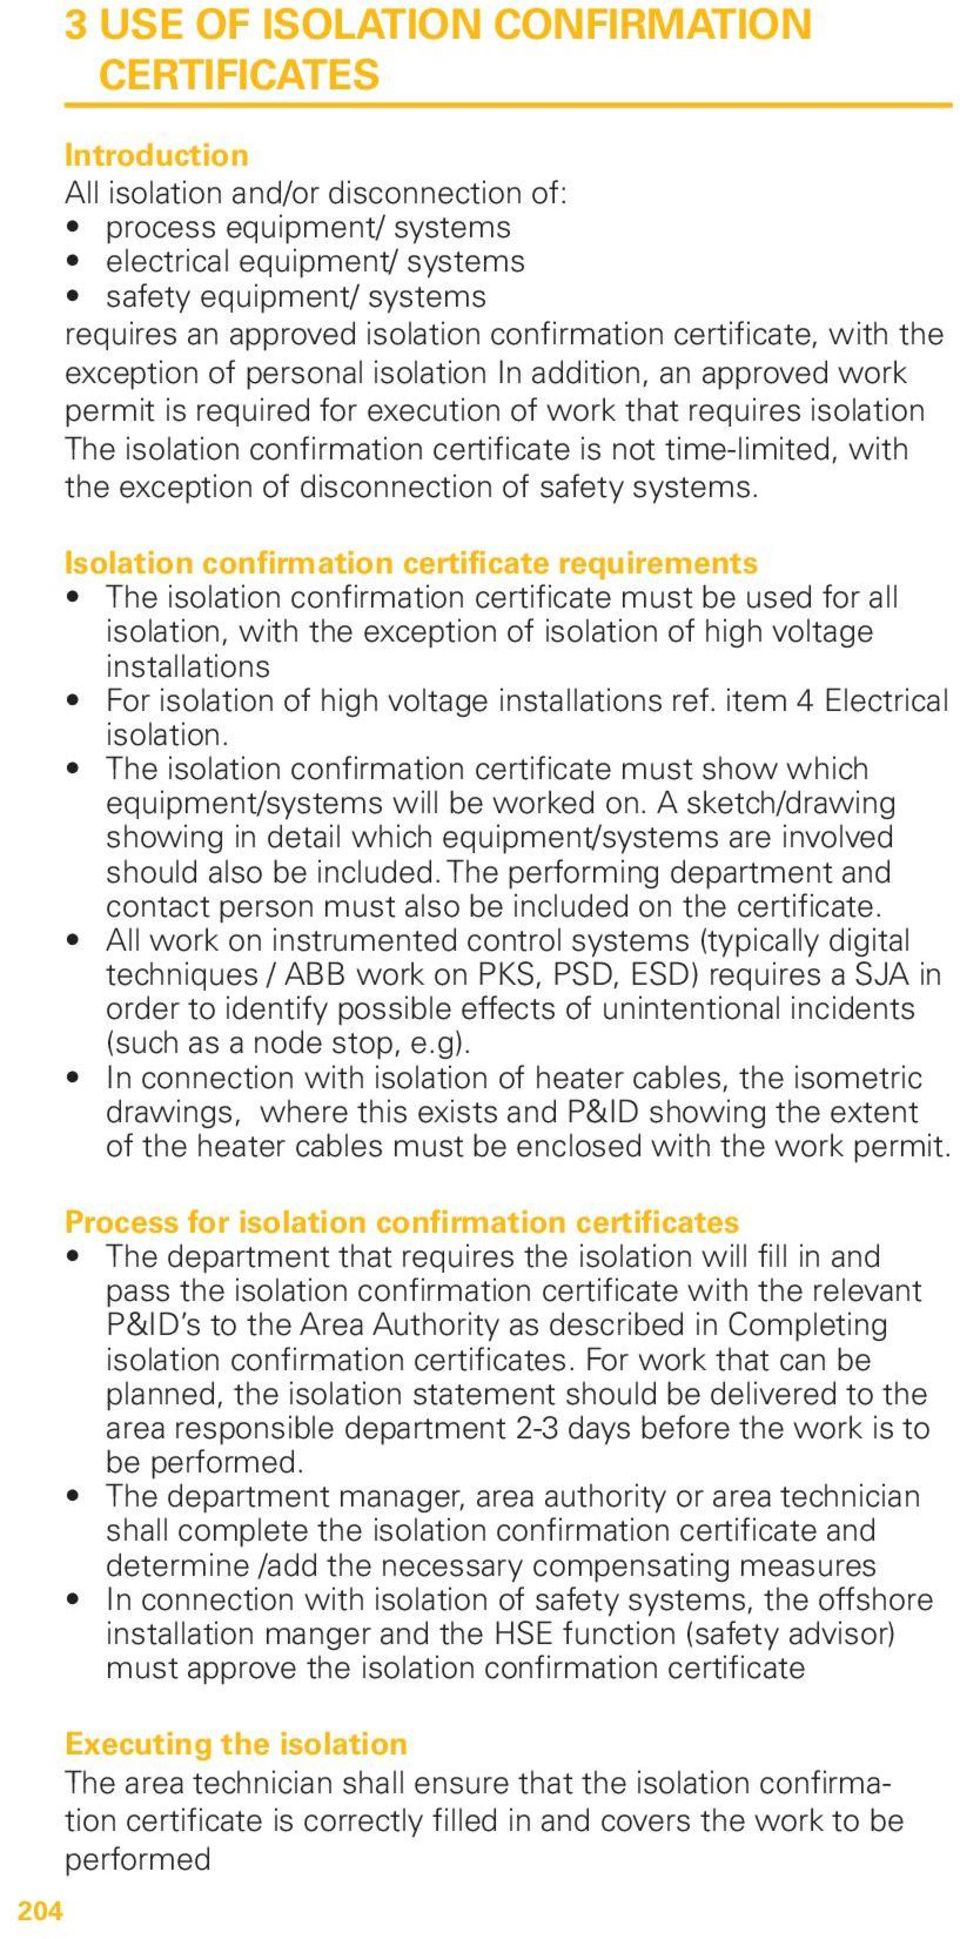 confirmation certificate is not time-limited, with the exception of disconnection of safety systems.